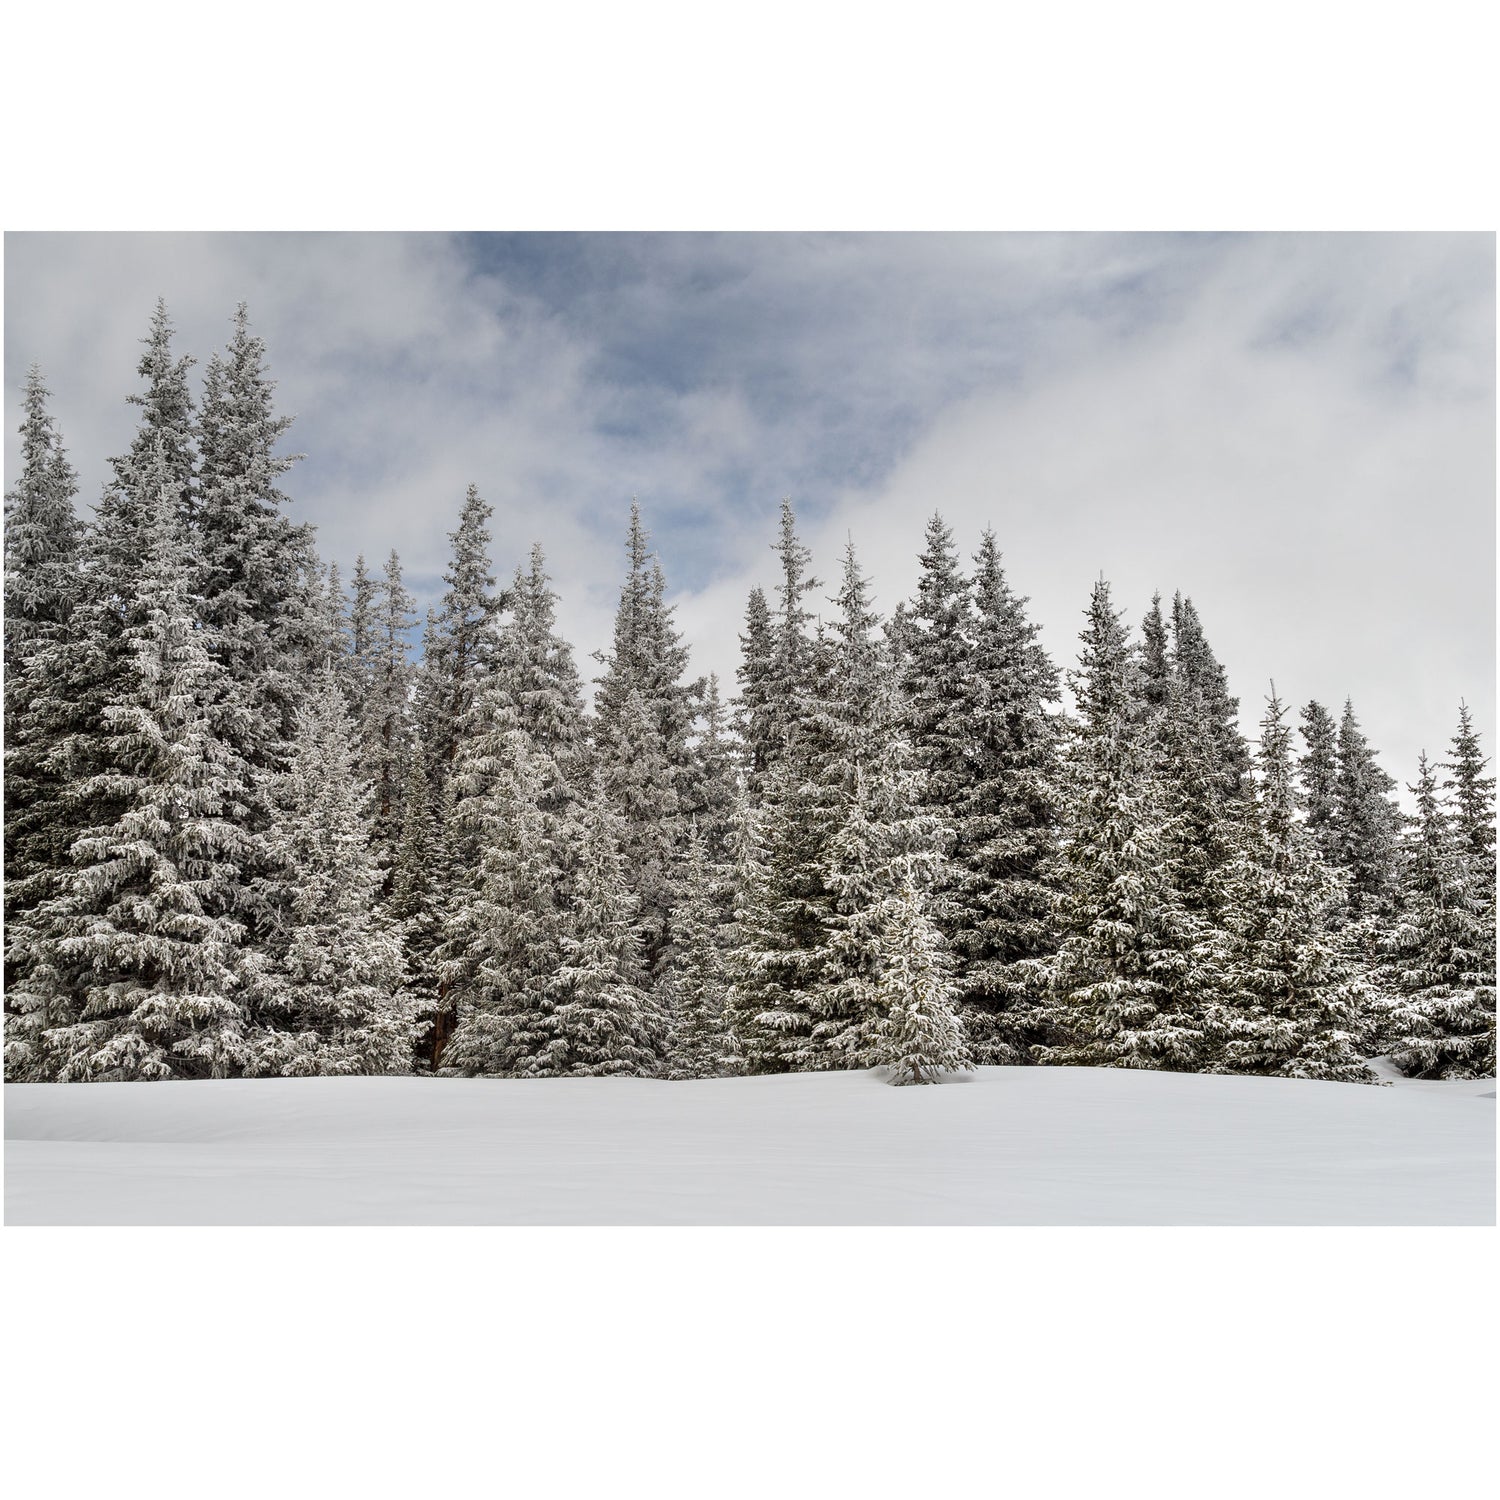 nature print of snowy pine trees on Hoosier Pass in Colorado